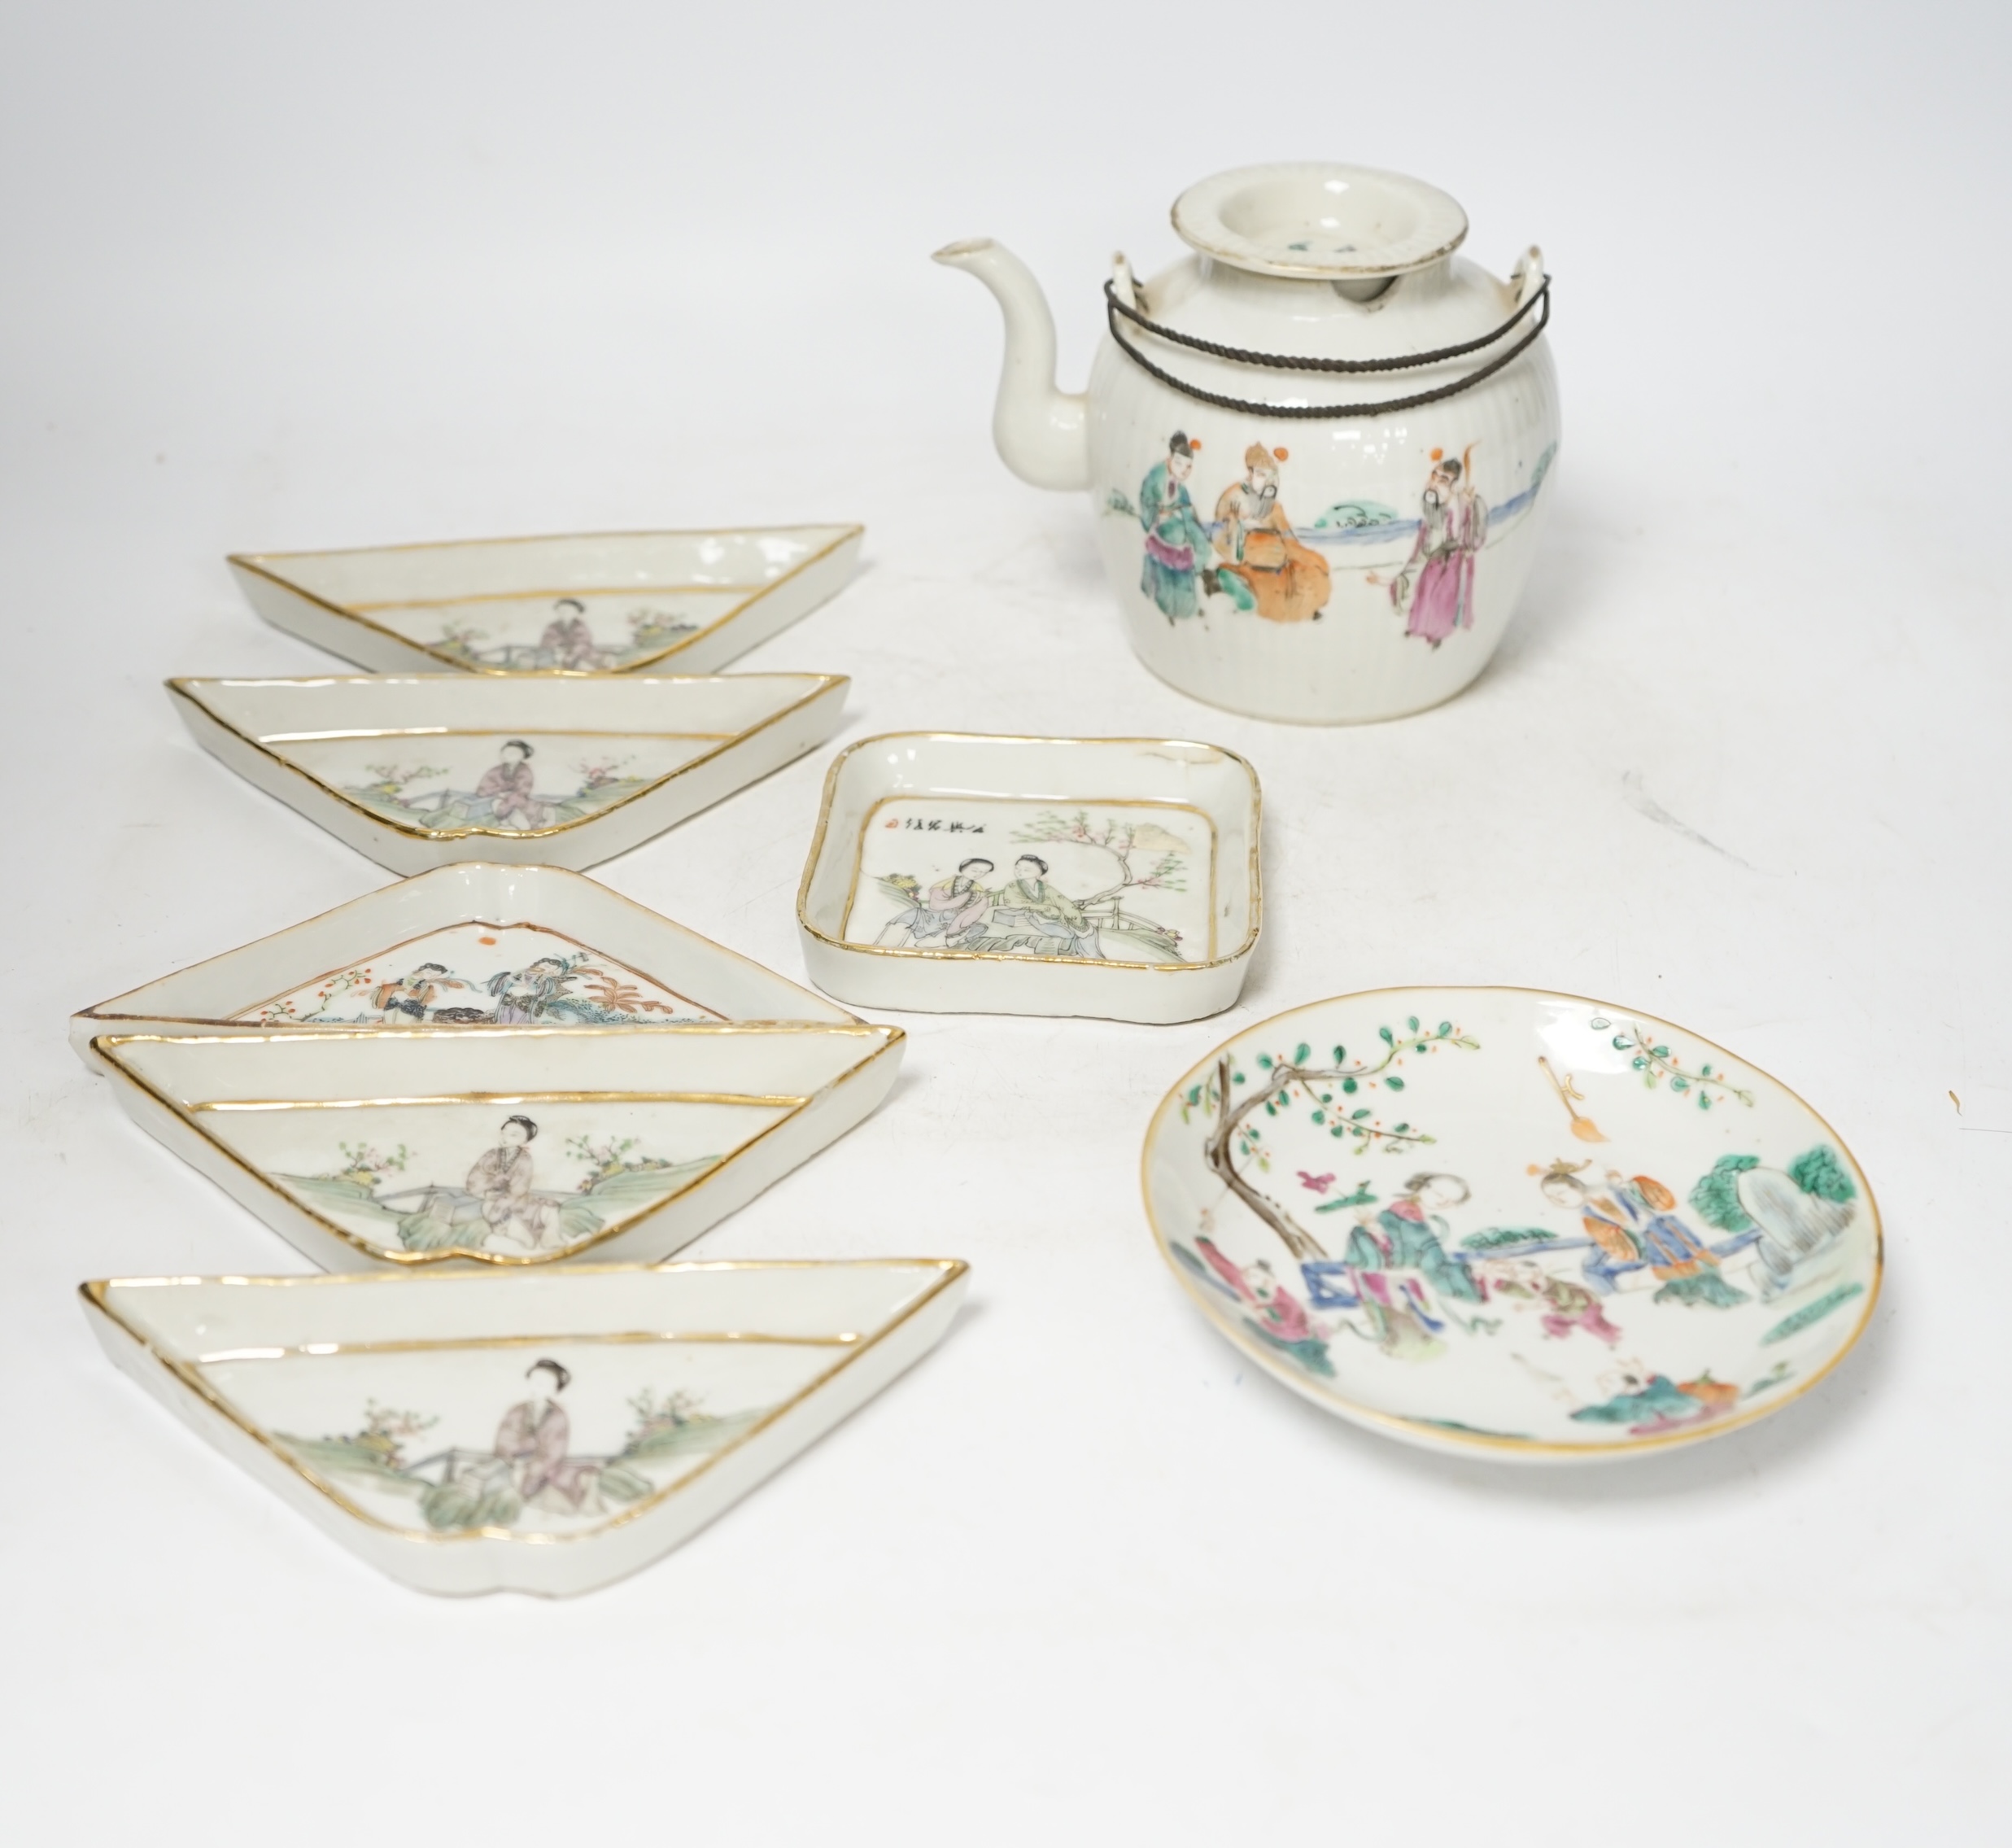 Chinese ceramics to include a teapot and a set of five dishes, 19th/20th century, largest 15cm wide. Condition - poor